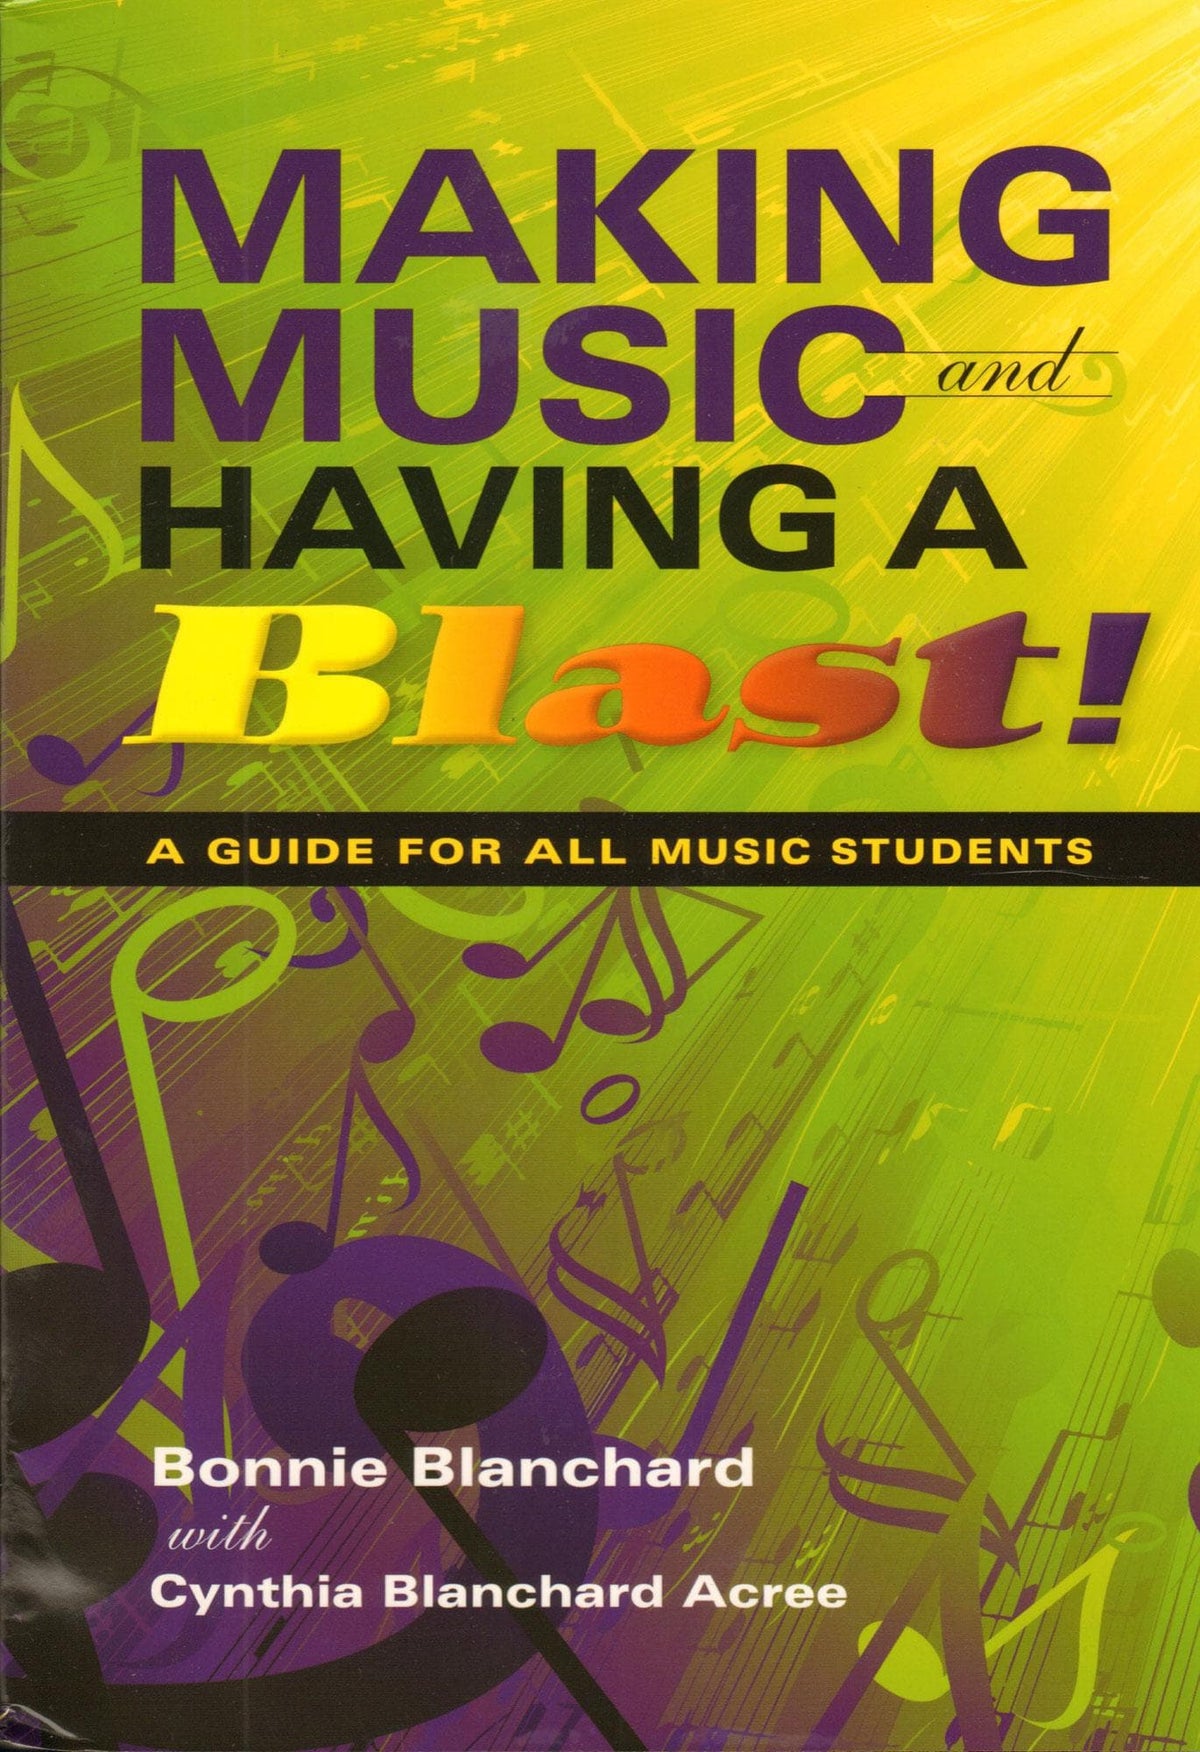 Making Music And Having A Blast - A Guide For All Music Students - by Bonnie Blanchard with Cynthia Blanchard Acree